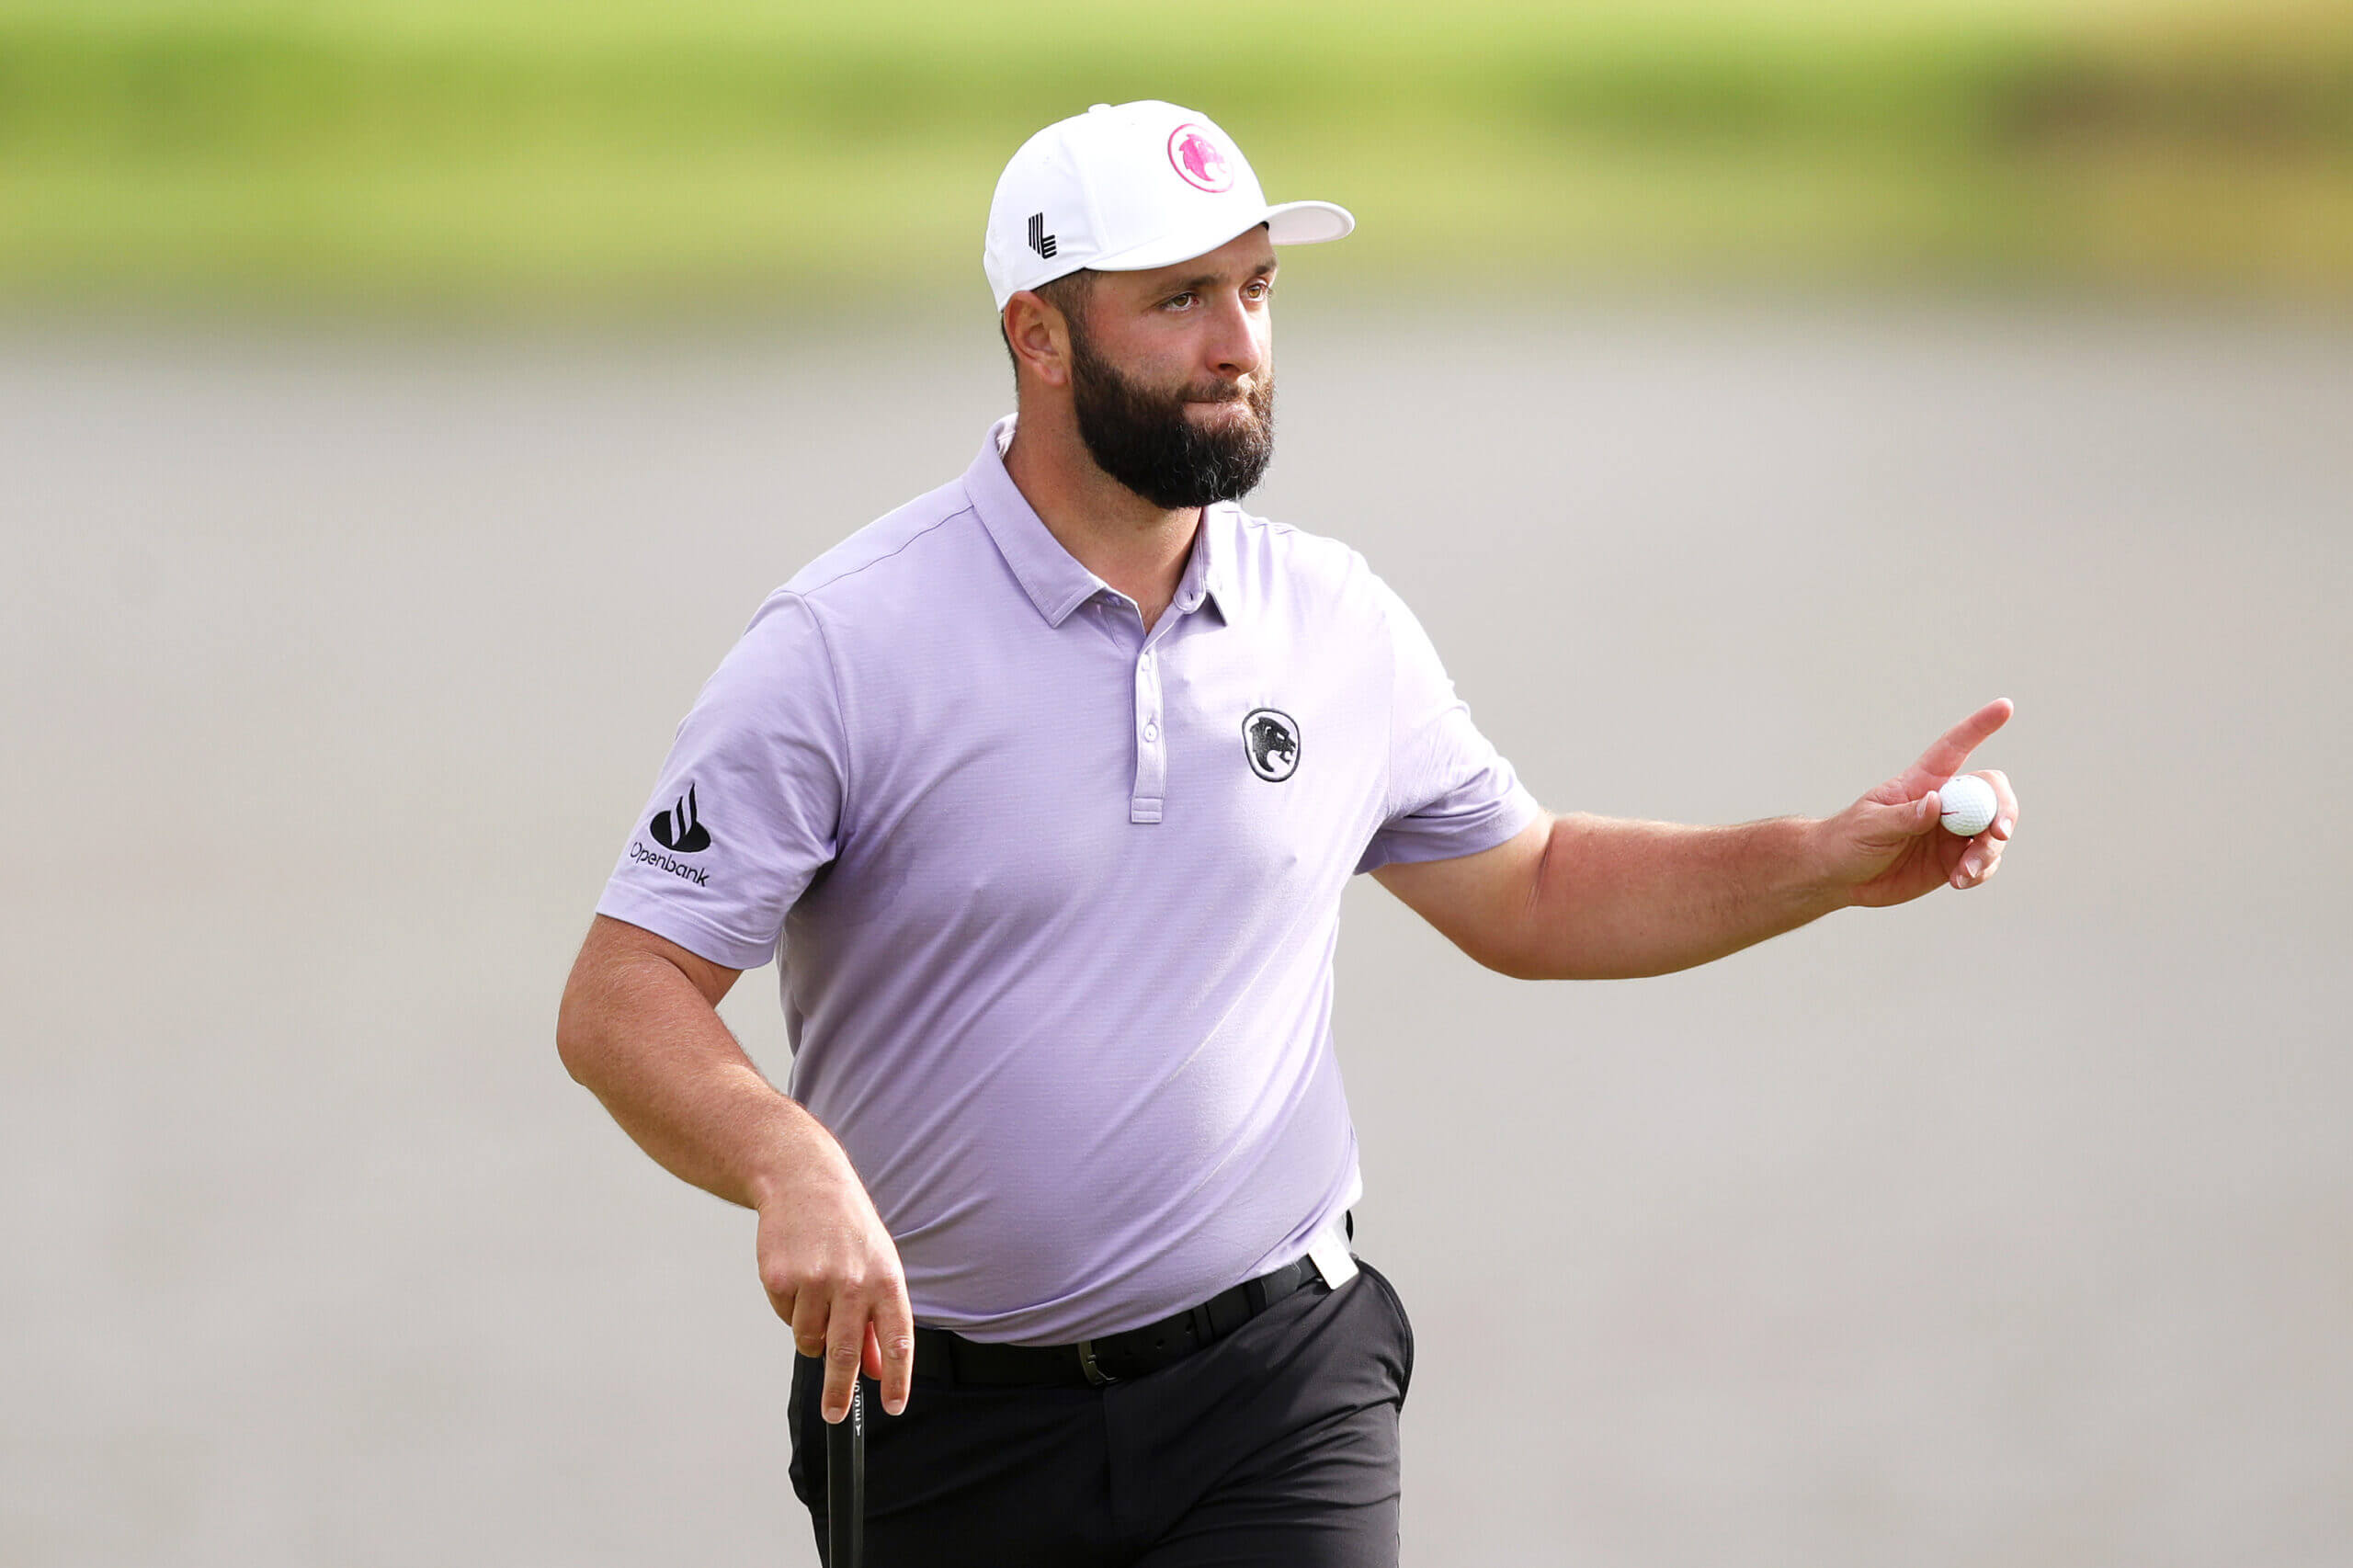 Jon Rahm's quest for a first LIV win may be finally ending